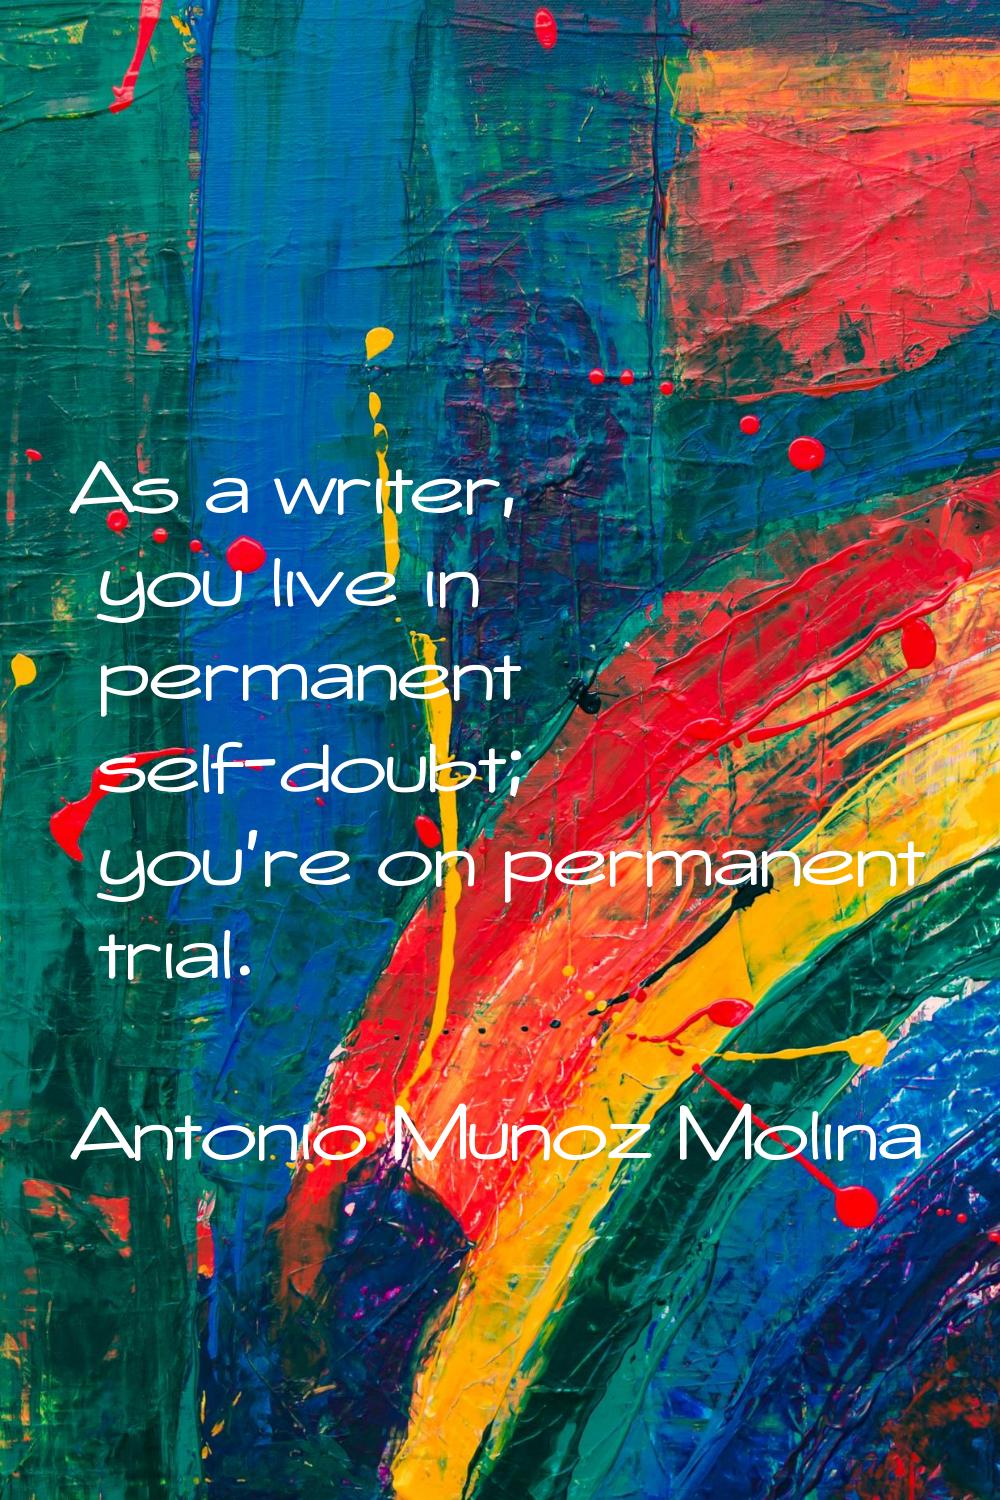 As a writer, you live in permanent self-doubt; you're on permanent trial.